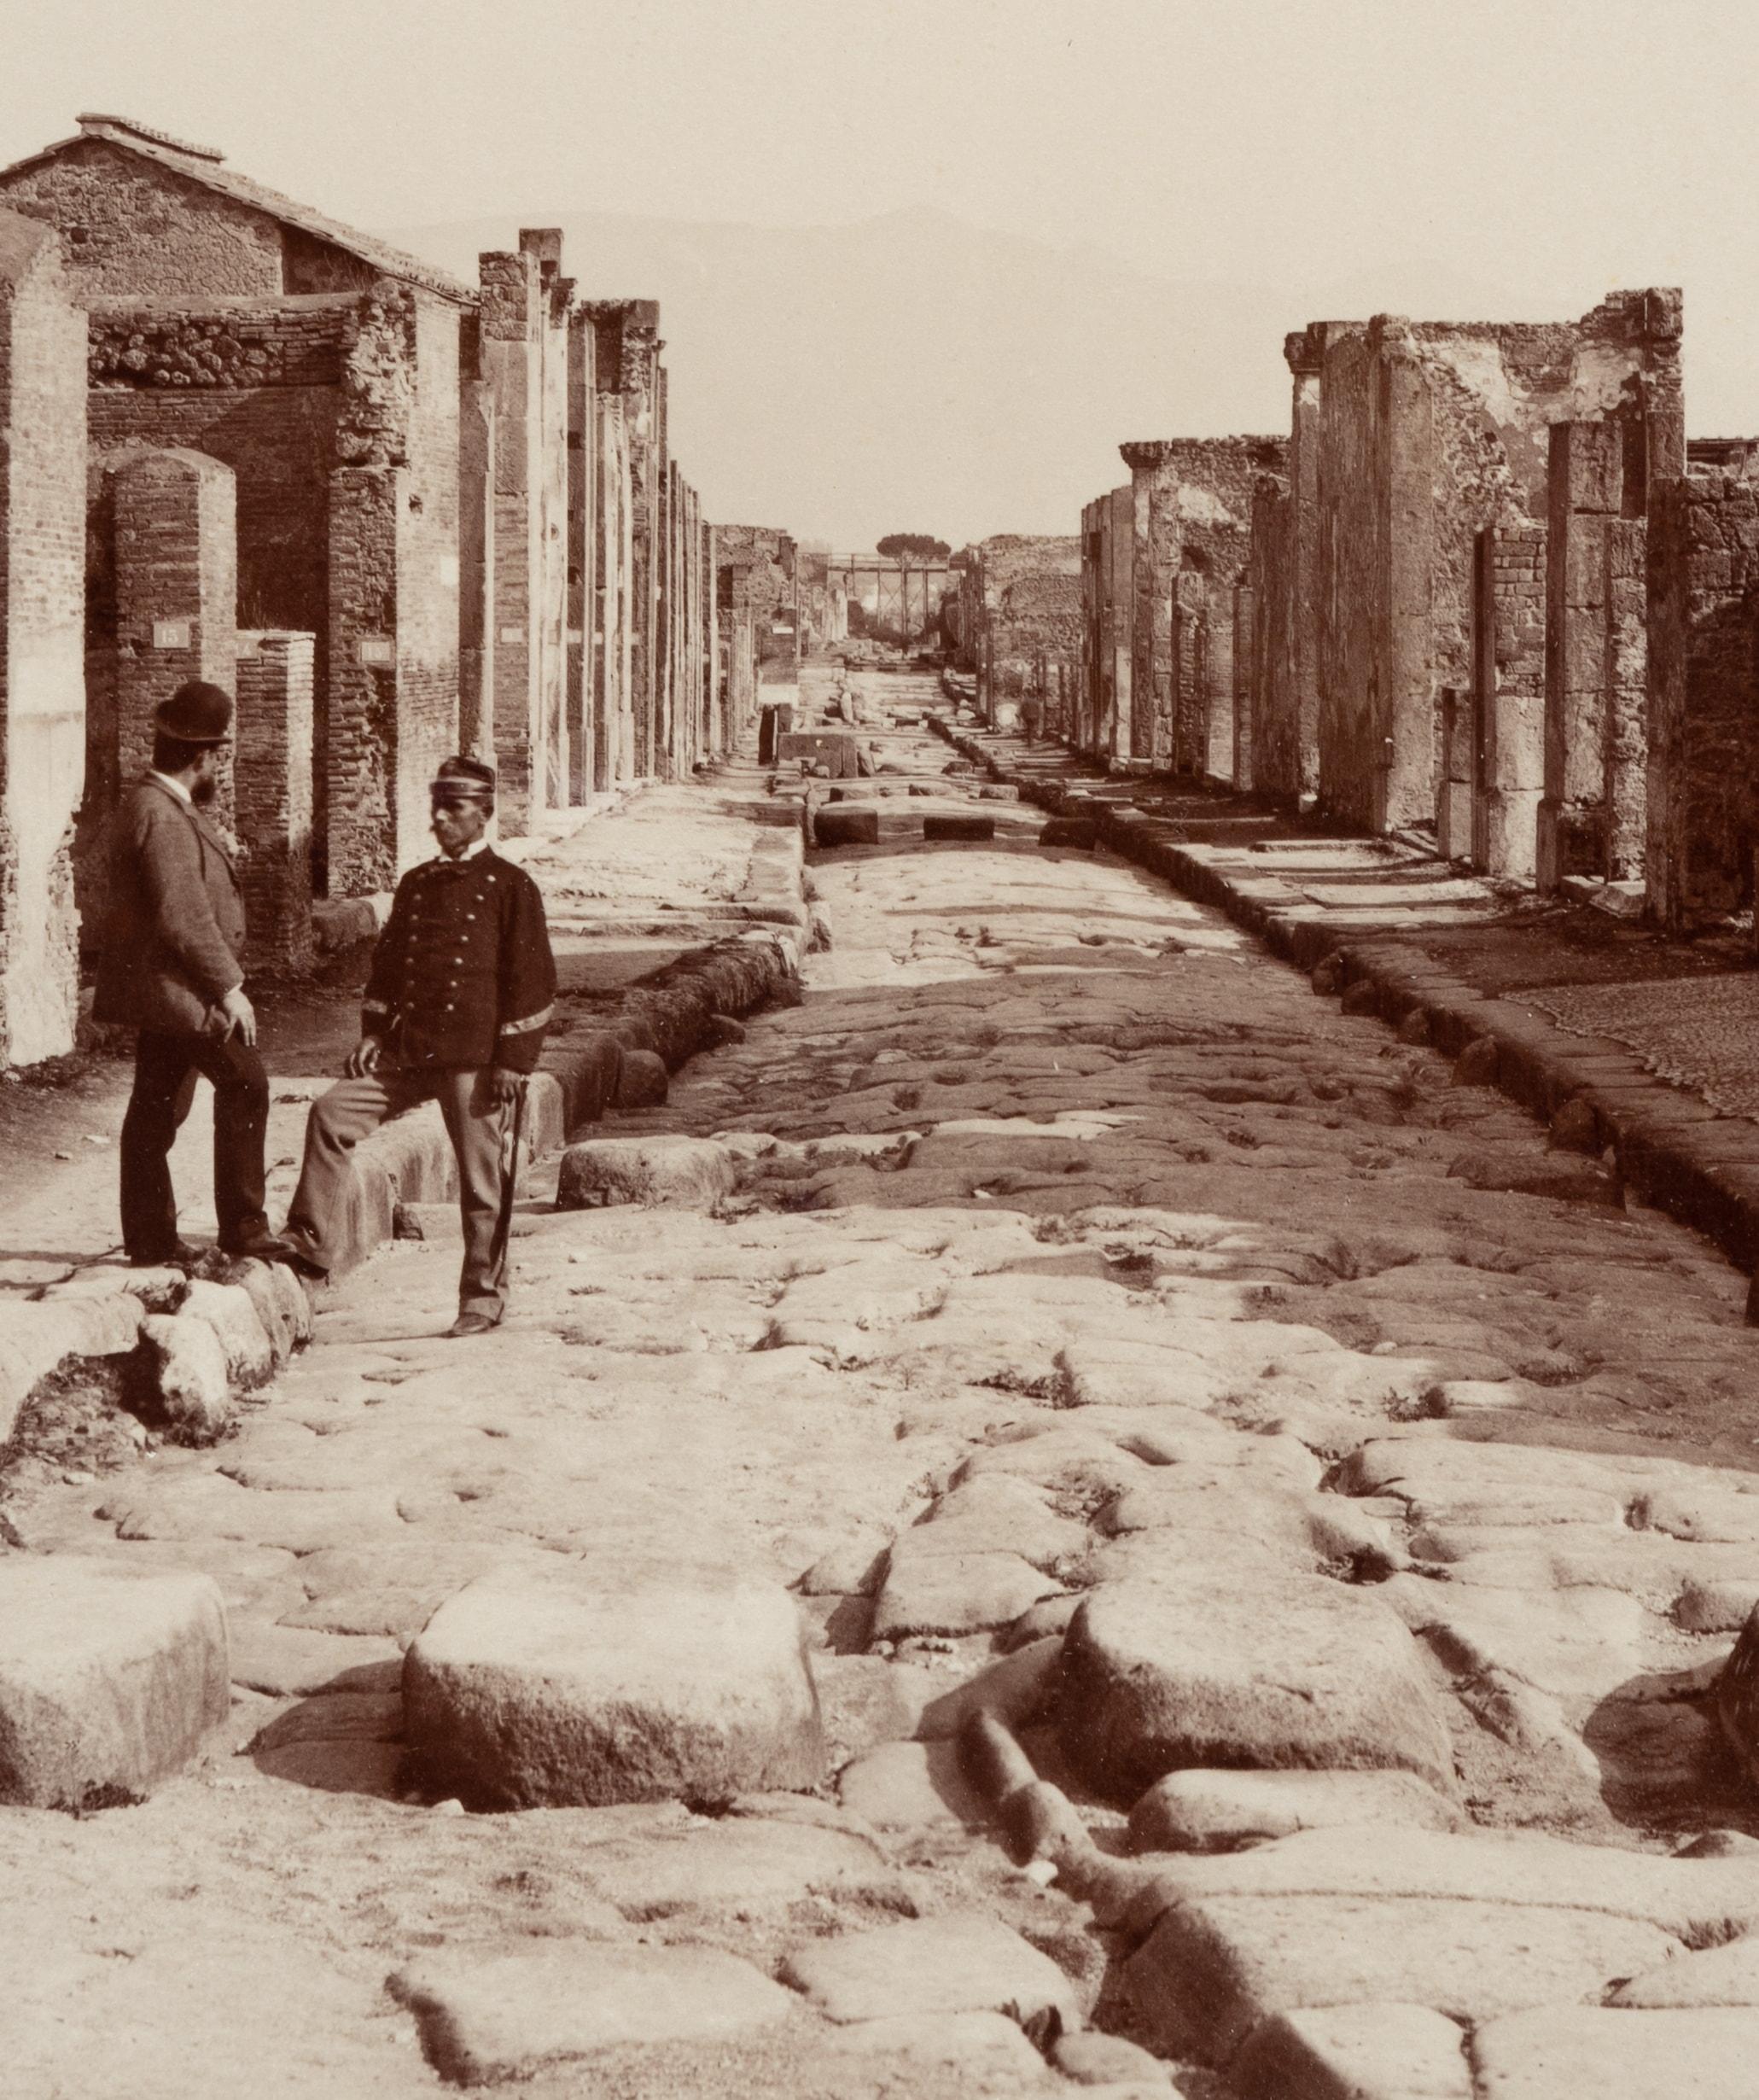 Fratelli Alinari (19th century): Pompei Strada della Fortuna View through one of the main streets of Pompei with two gentlemen placed by the photographer standing in the street, c. 1880, albumen paper print

Technique: albumen paper